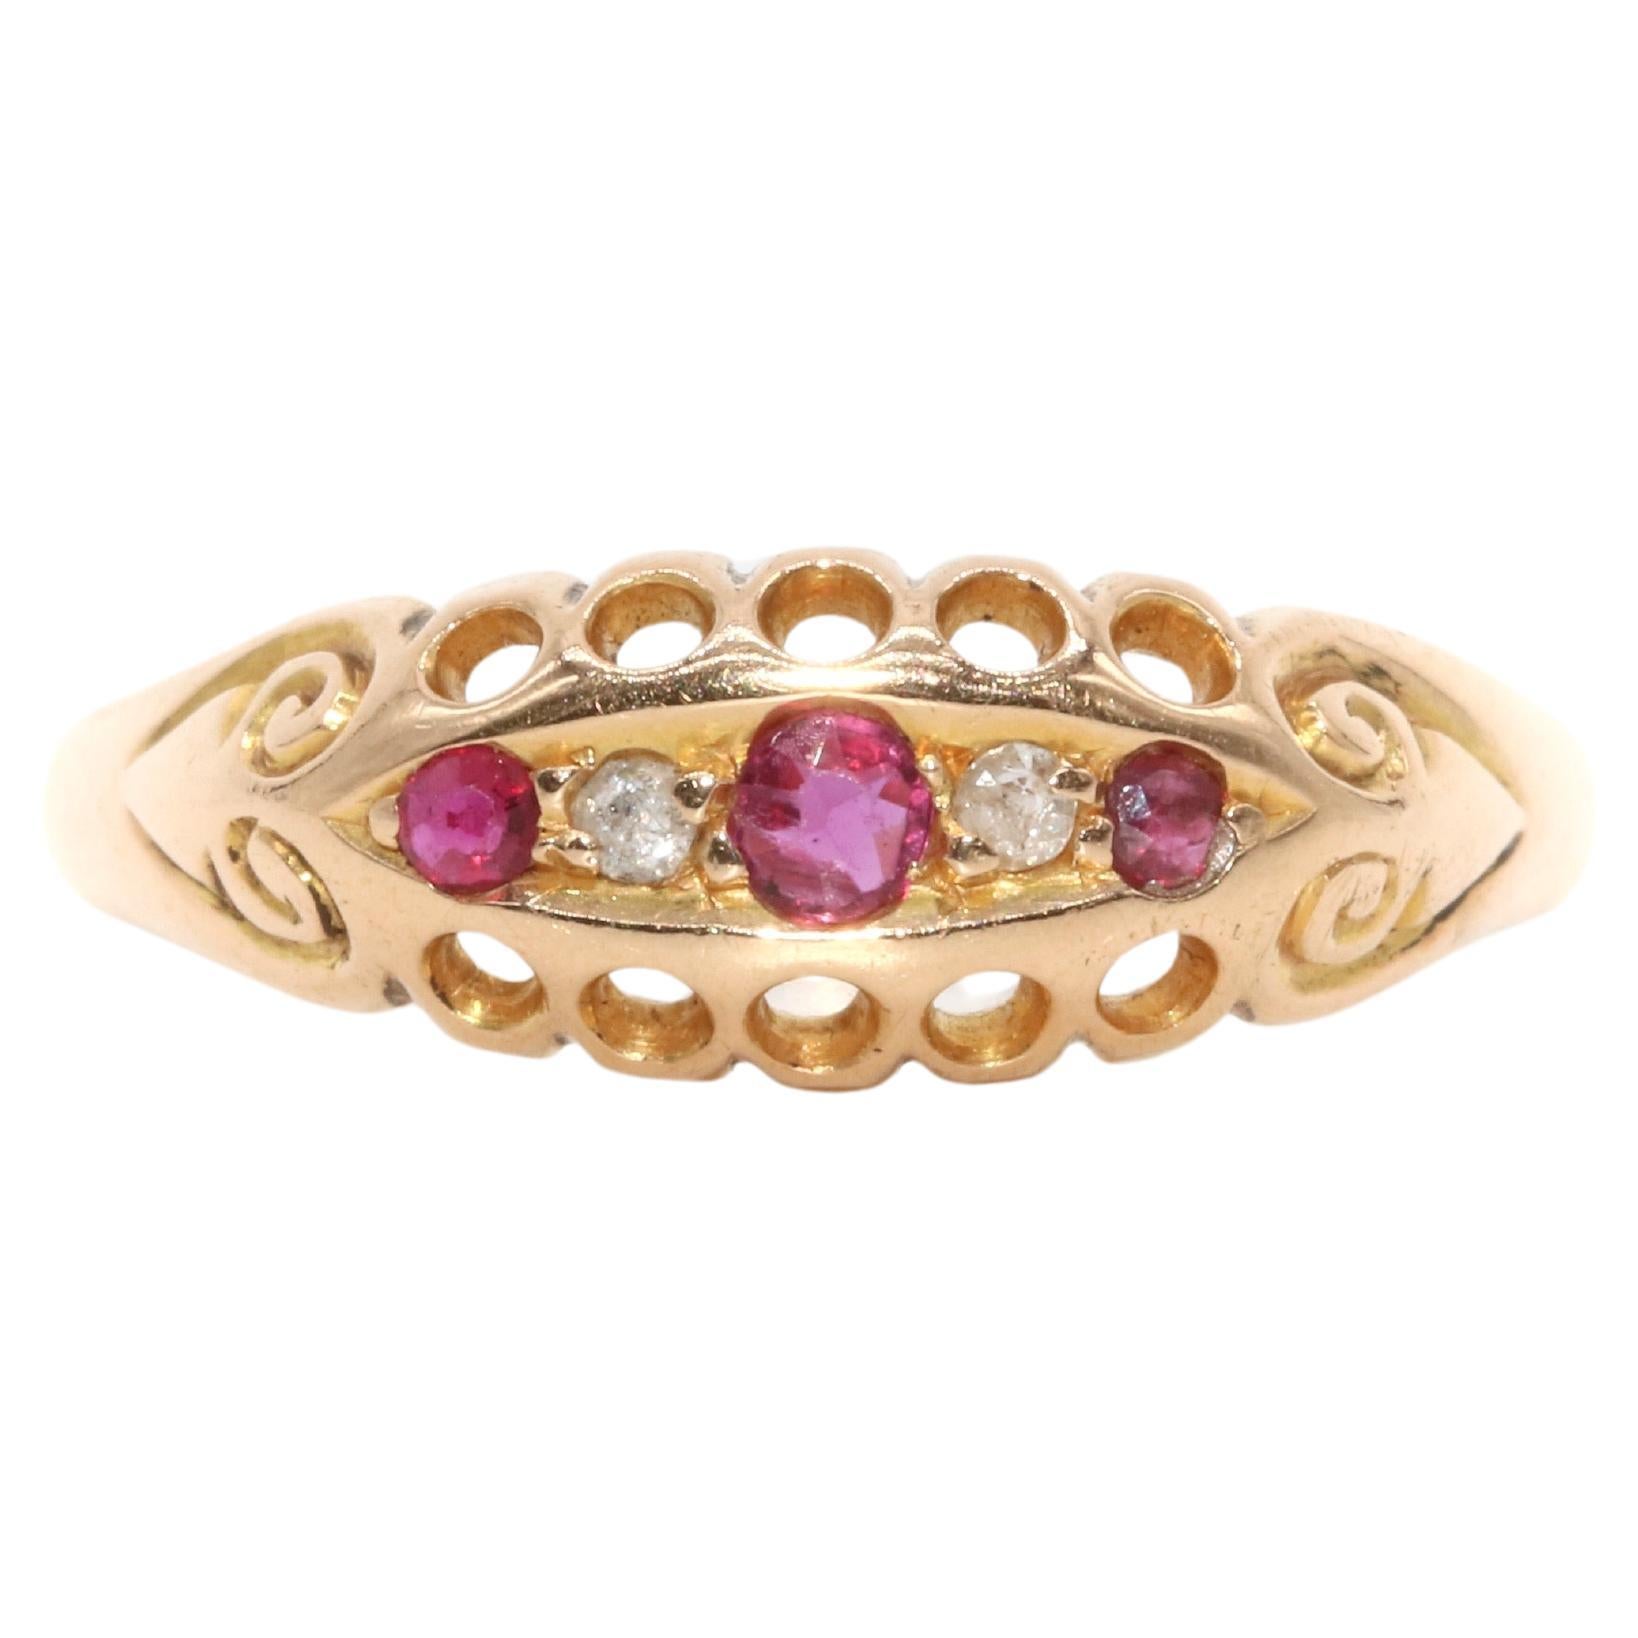 Antique Edwardian 18K Yellow Gold Ruby and Diamond 5 Stone Ring